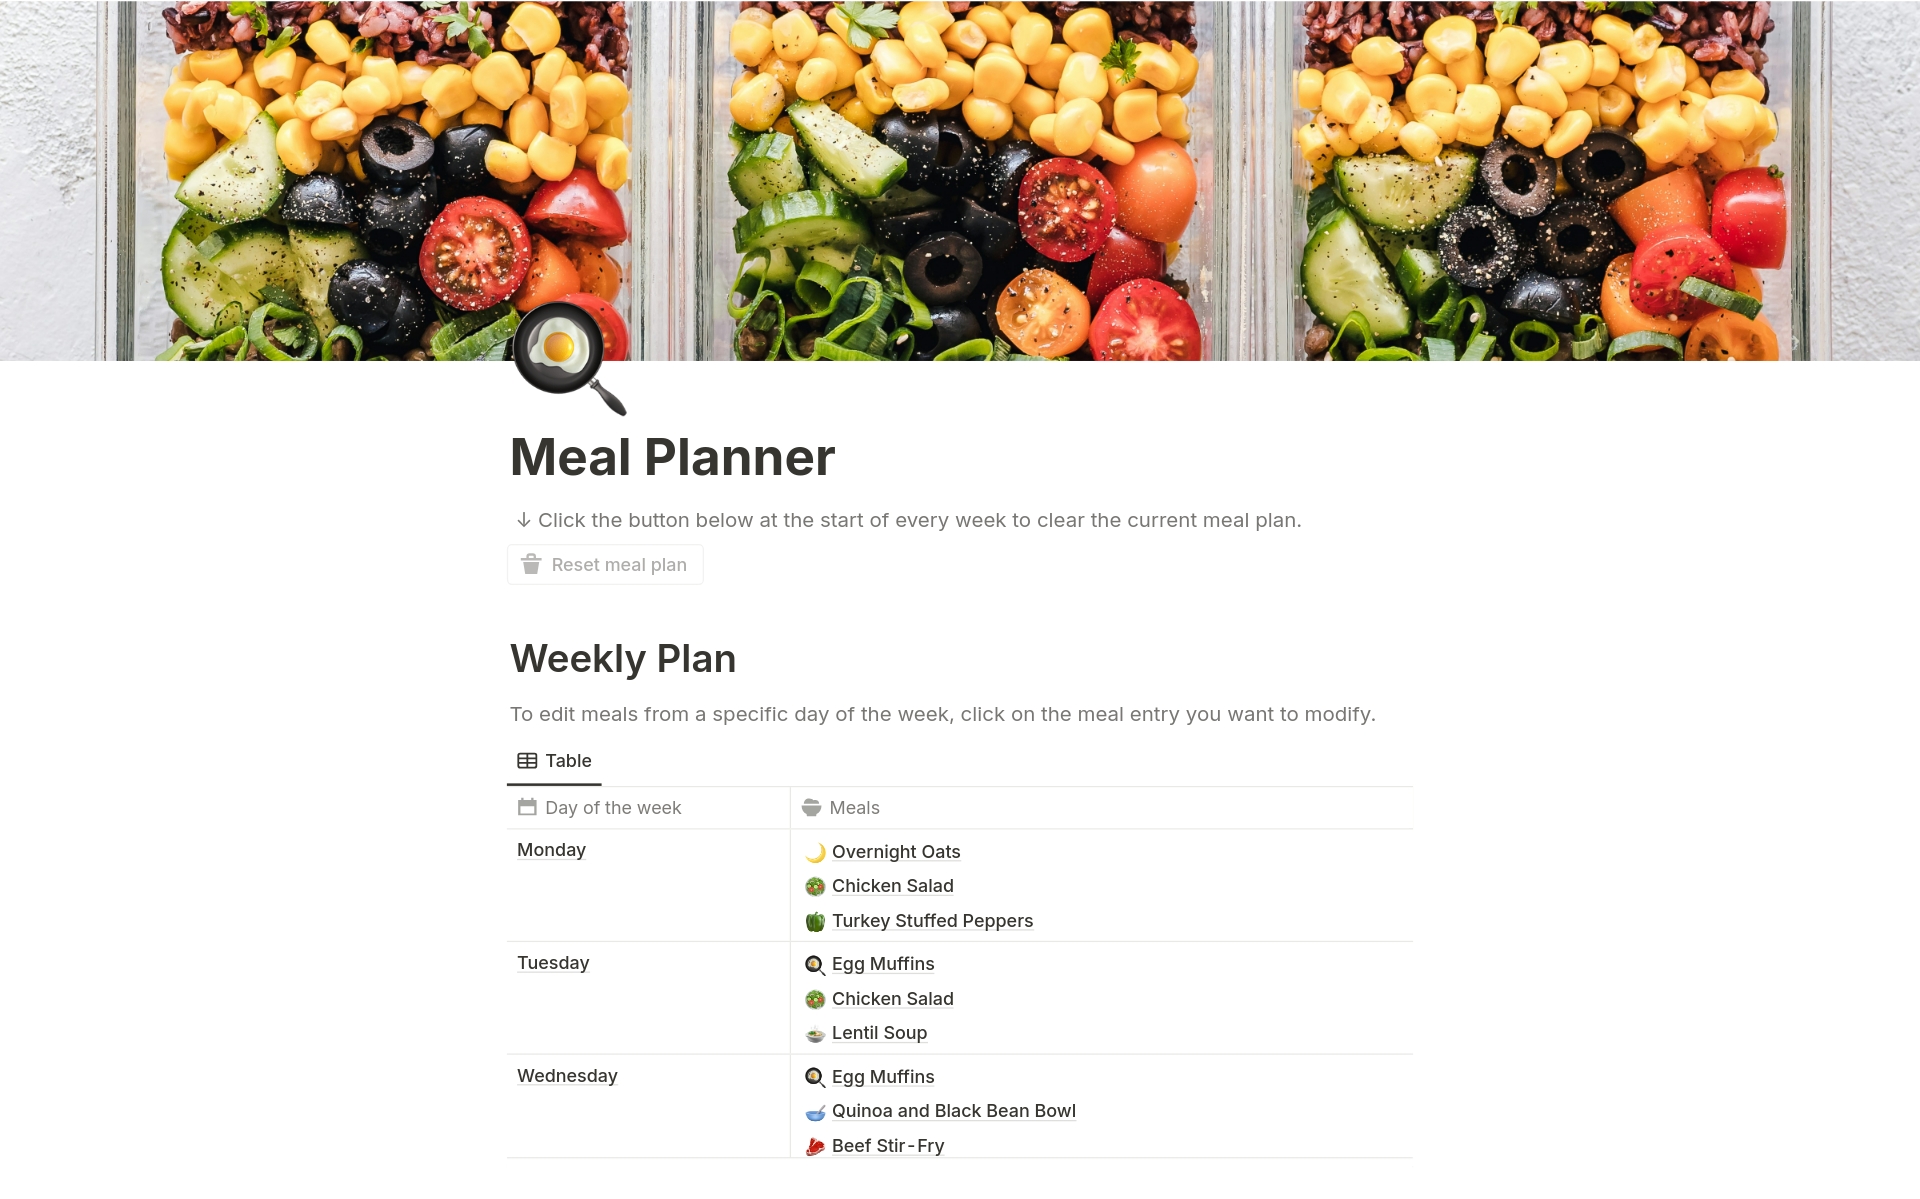 Plan your weekly meals effortlessly with this Meal Planner template! Just add your favorite dishes and link them to the days you'll enjoy them. For each meal, you can easily note down ingredients and cooking steps.